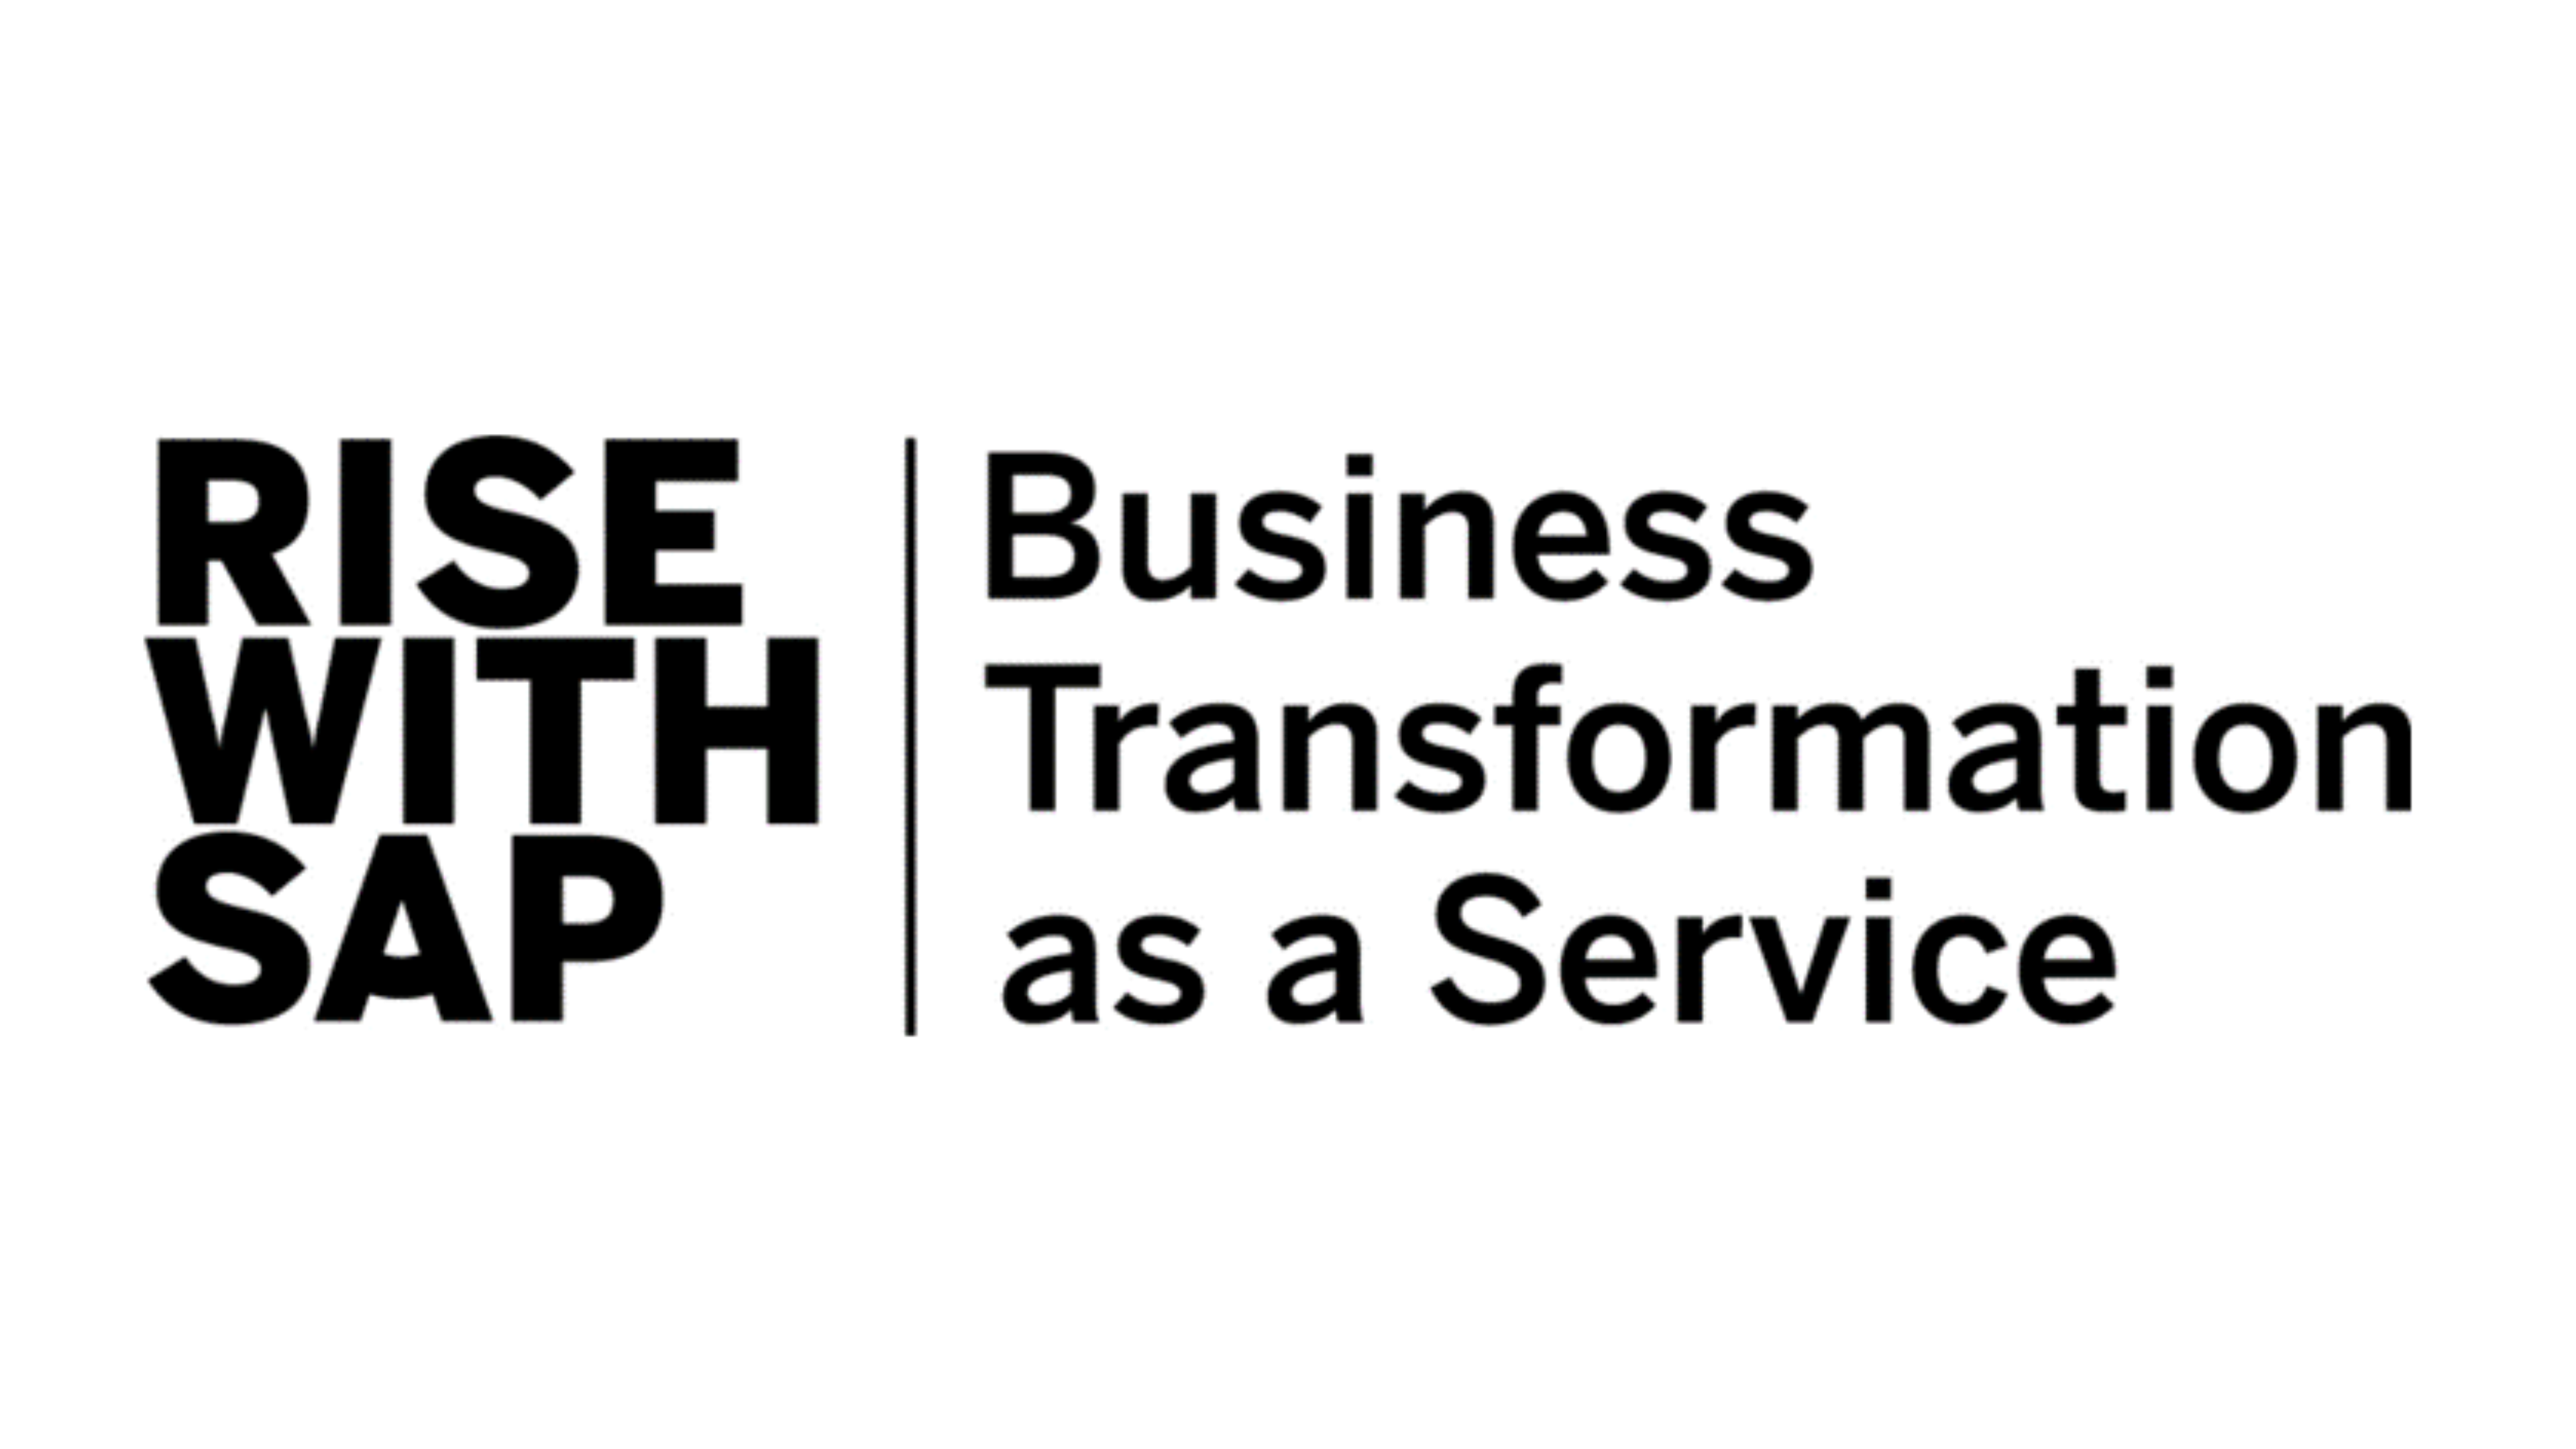 Rise with SAP Business Transformation as a Service